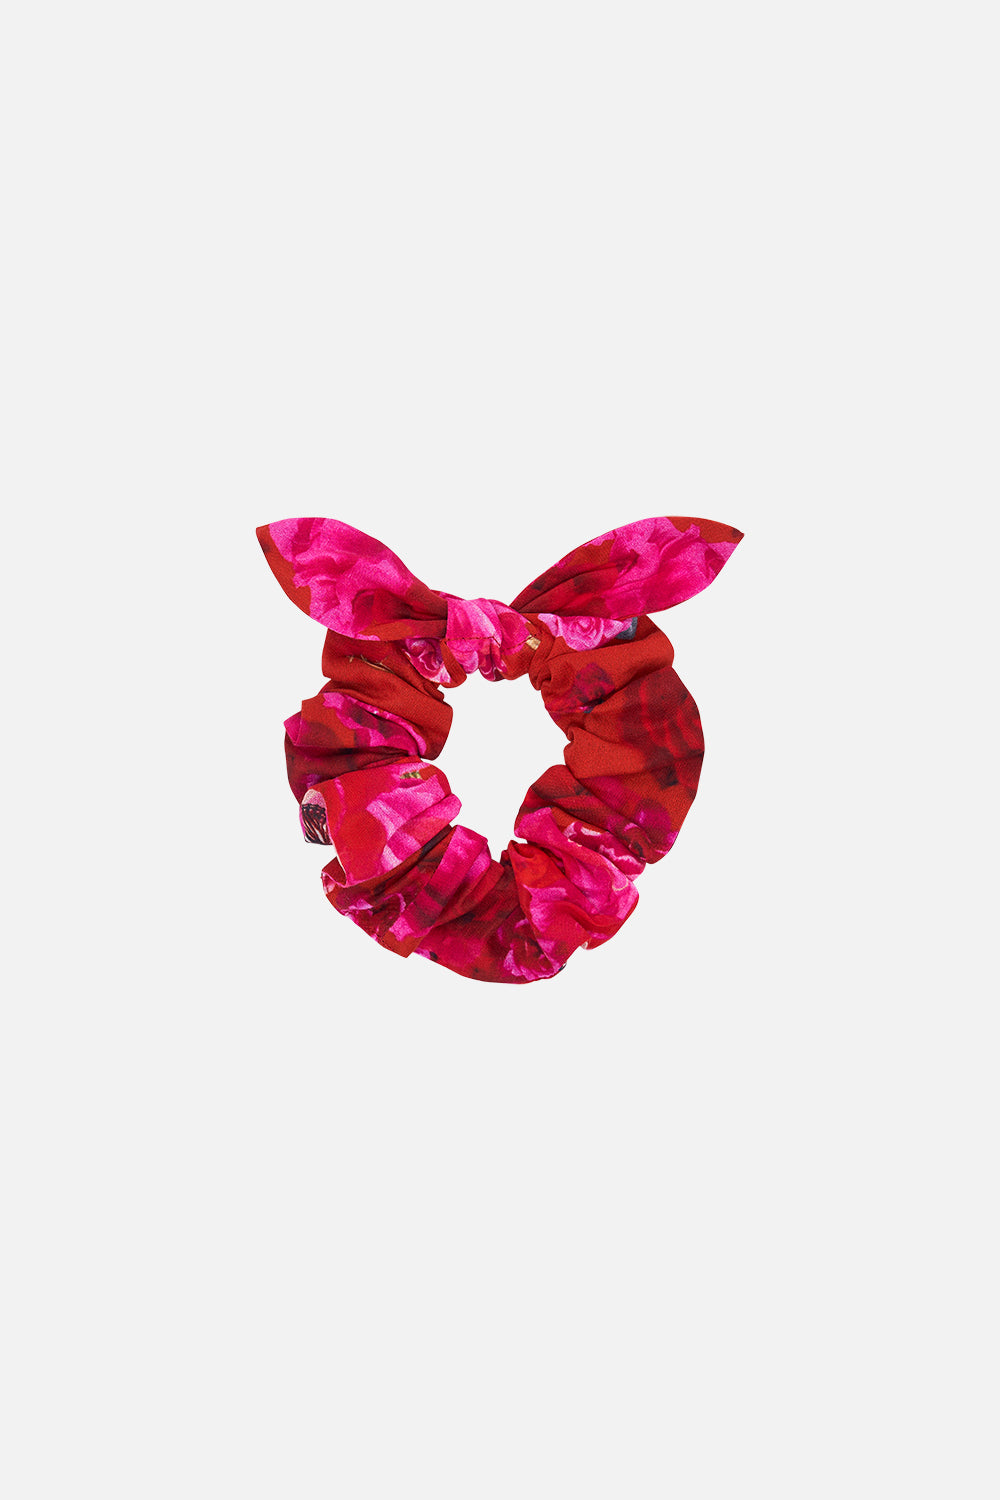 Product view of Milla By CAMILLA kids hair accessory set in An Italian Rosa print 